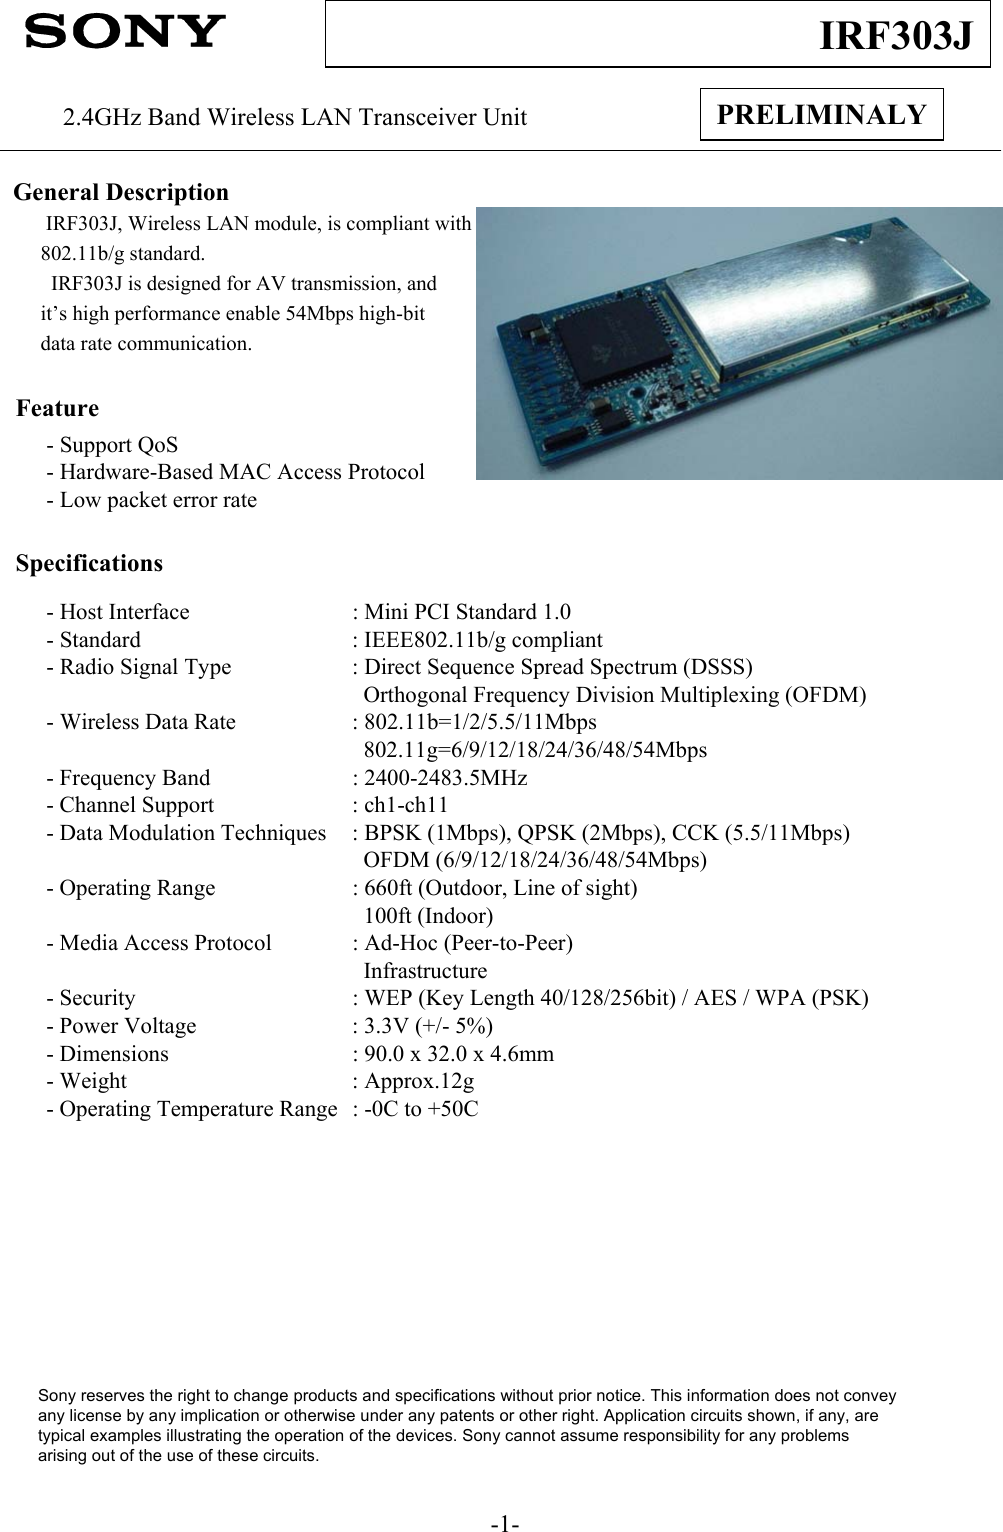 -1-IRF303JPRELIMINALY2.4GHz Band Wireless LAN Transceiver UnitGeneral DescriptionIRF303J, Wireless LAN module, is compliant with802.11b/g standard.  IRF303J is designed for AV transmission, and it’s high performance enable 54Mbps high-bit data rate communication.Feature- Support QoS- Hardware-Based MAC Access Protocol- Low packet error rateSpecifications- Host Interface : Mini PCI Standard 1.0 - Standard : IEEE802.11b/g compliant- Radio Signal Type : Direct Sequence Spread Spectrum (DSSS)Orthogonal Frequency Division Multiplexing (OFDM)- Wireless Data Rate : 802.11b=1/2/5.5/11Mbps802.11g=6/9/12/18/24/36/48/54Mbps- Frequency Band : 2400-2483.5MHz- Channel Support : ch1-ch11- Data Modulation Techniques : BPSK (1Mbps), QPSK (2Mbps), CCK (5.5/11Mbps)OFDM (6/9/12/18/24/36/48/54Mbps)- Operating Range : 660ft (Outdoor, Line of sight)100ft (Indoor)- Media Access Protocol : Ad-Hoc (Peer-to-Peer)Infrastructure- Security : WEP (Key Length 40/128/256bit) / AES / WPA (PSK)- Power Voltage : 3.3V (+/- 5%)- Dimensions : 90.0 x 32.0 x 4.6mm- Weight : Approx.12g- Operating Temperature Range : -0C to +50CSony reserves the right to change products and specifications without prior notice. This information does not conveyany license by any implication or otherwise under any patents or other right. Application circuits shown, if any, aretypical examples illustrating the operation of the devices. Sony cannot assume responsibility for any problemsarising out of the use of these circuits.